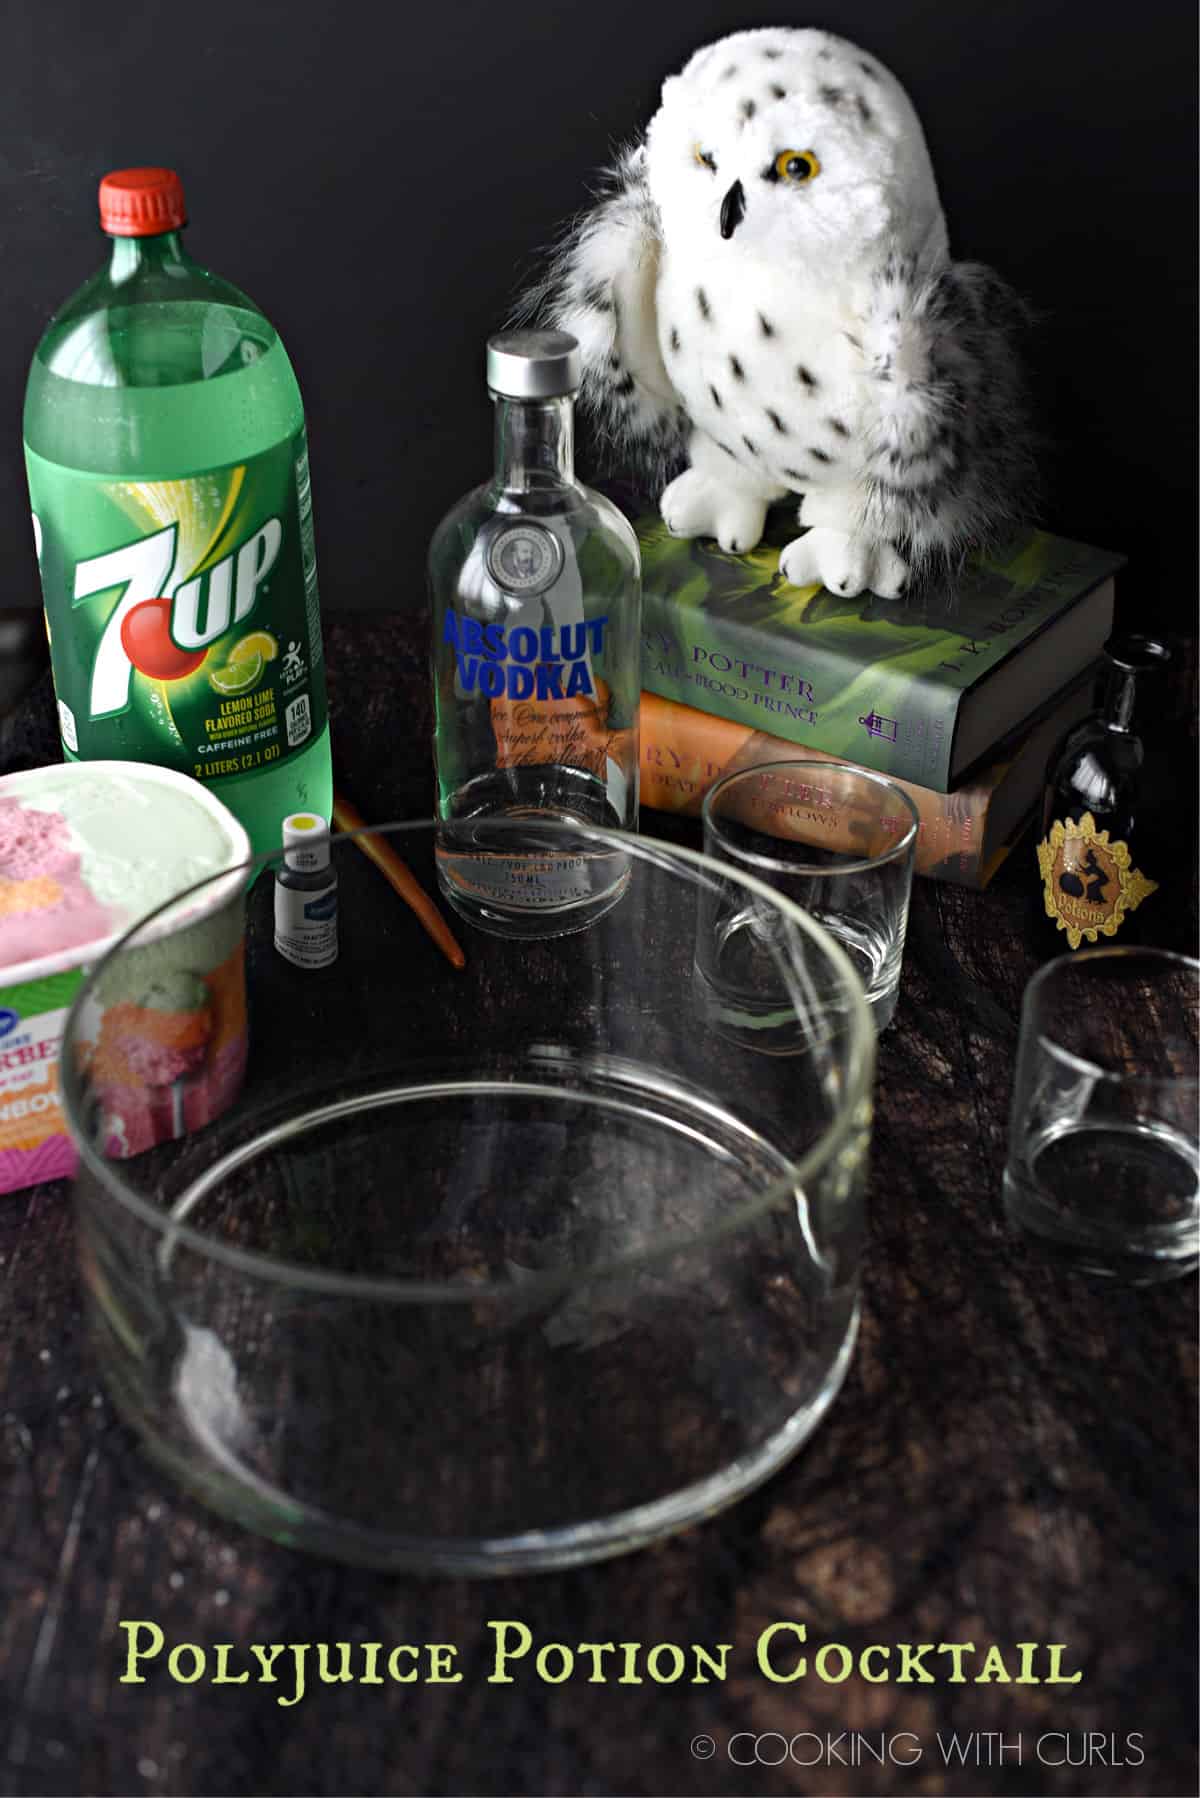 polyjuice potion ingredients; glass punch bowl, rainbow sherbet, 7up, Absolut vodka, lime green food coloring and a stack of harry potter books with a stuffed Hedwig owl on top.